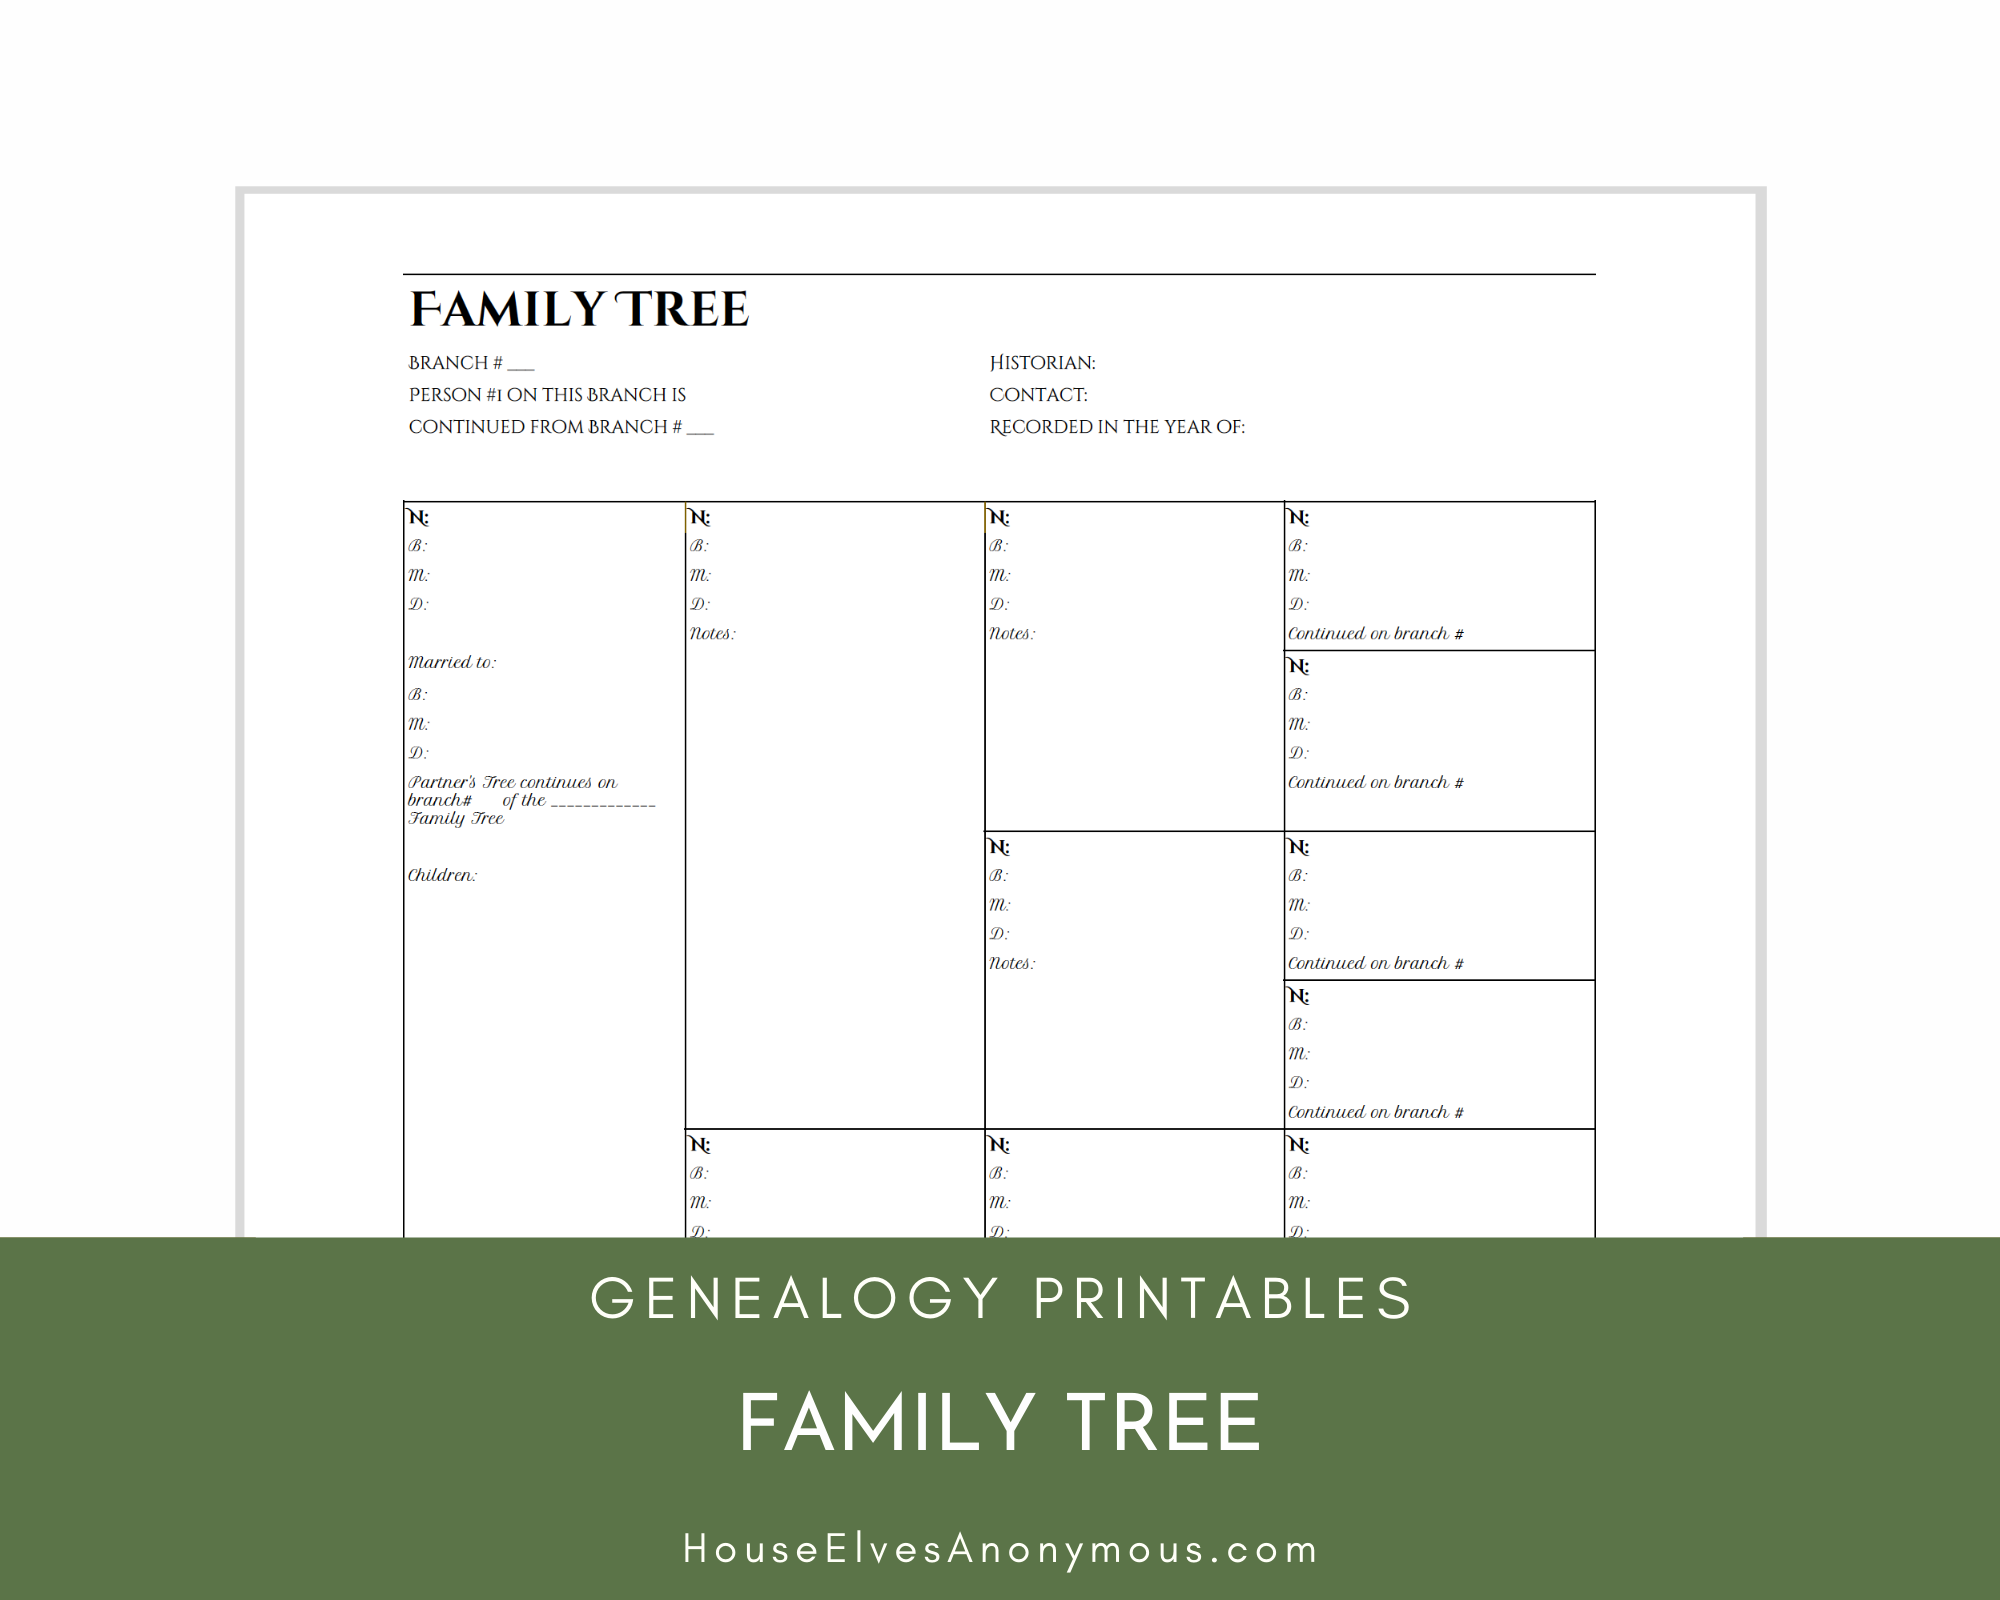 4 Generation Family Tree Chart BLACK - House Elves Anonymous